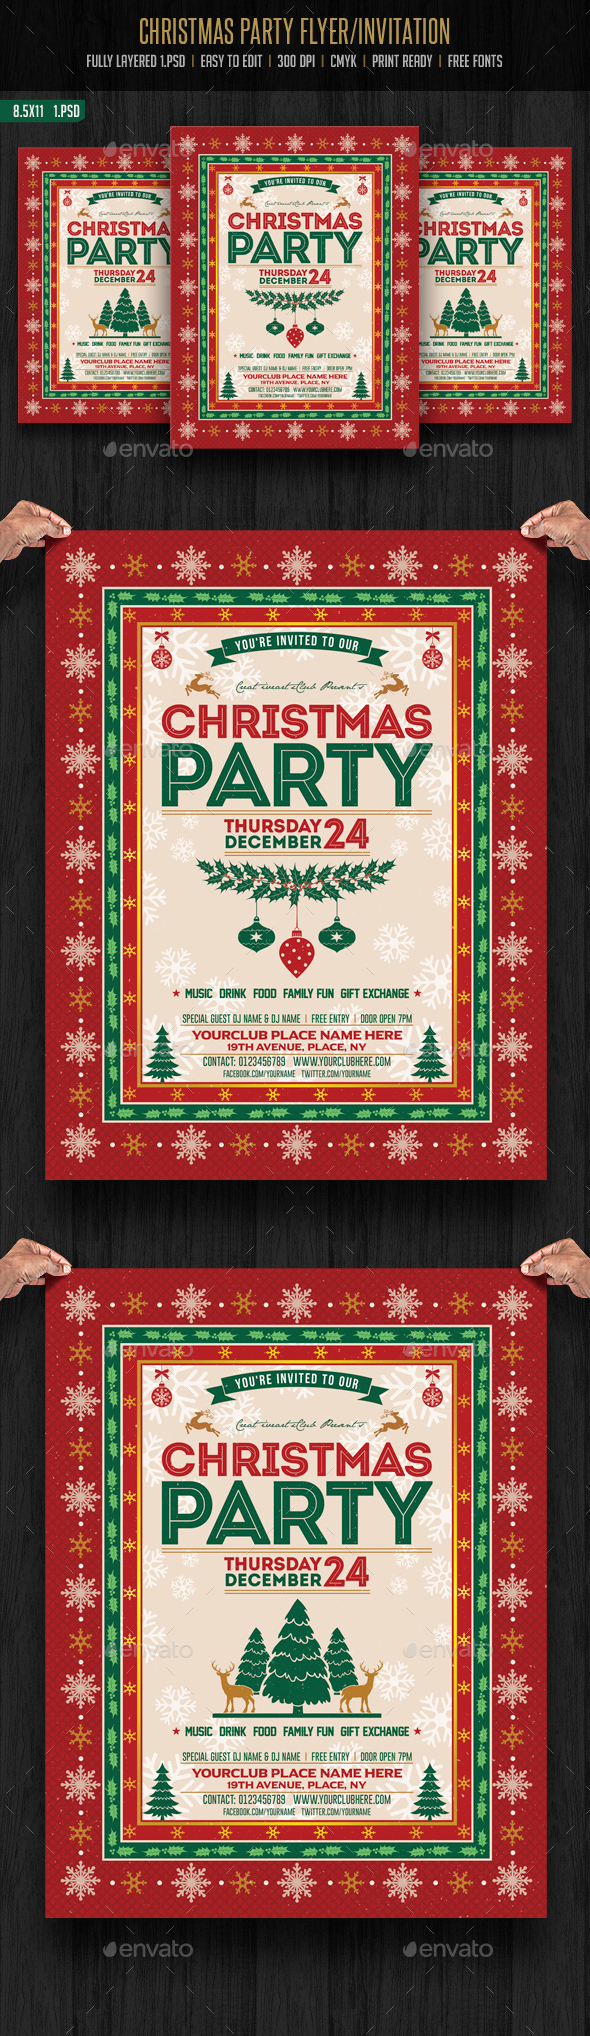 Christmas Party Flyer/ Invitation